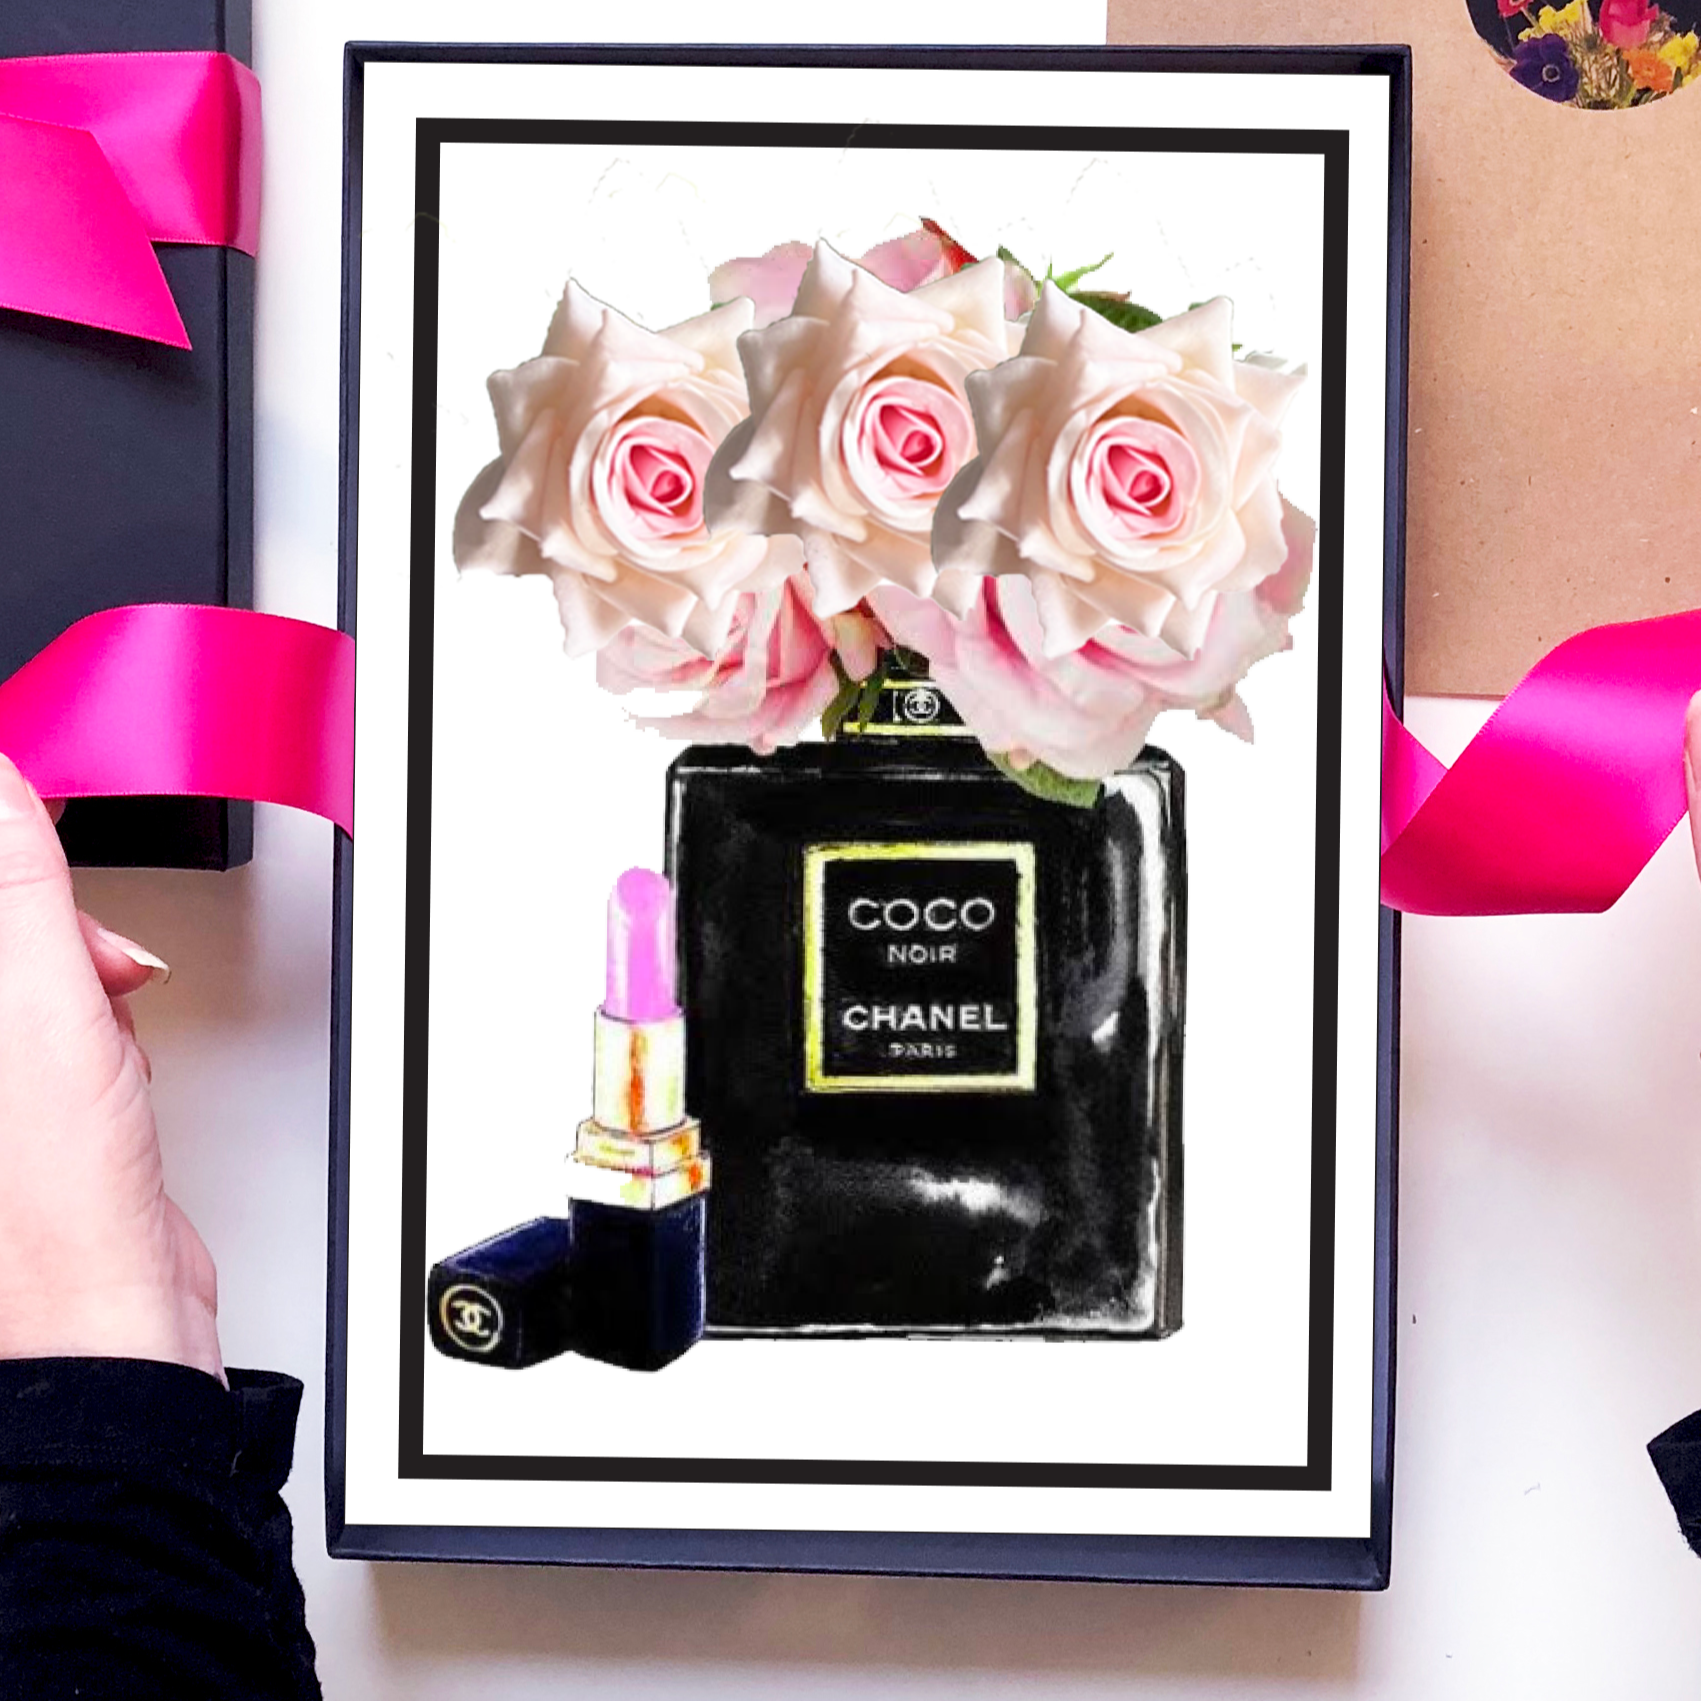 This Chanel campaign is too cute mothersday beauty chanel toocute   TikTok